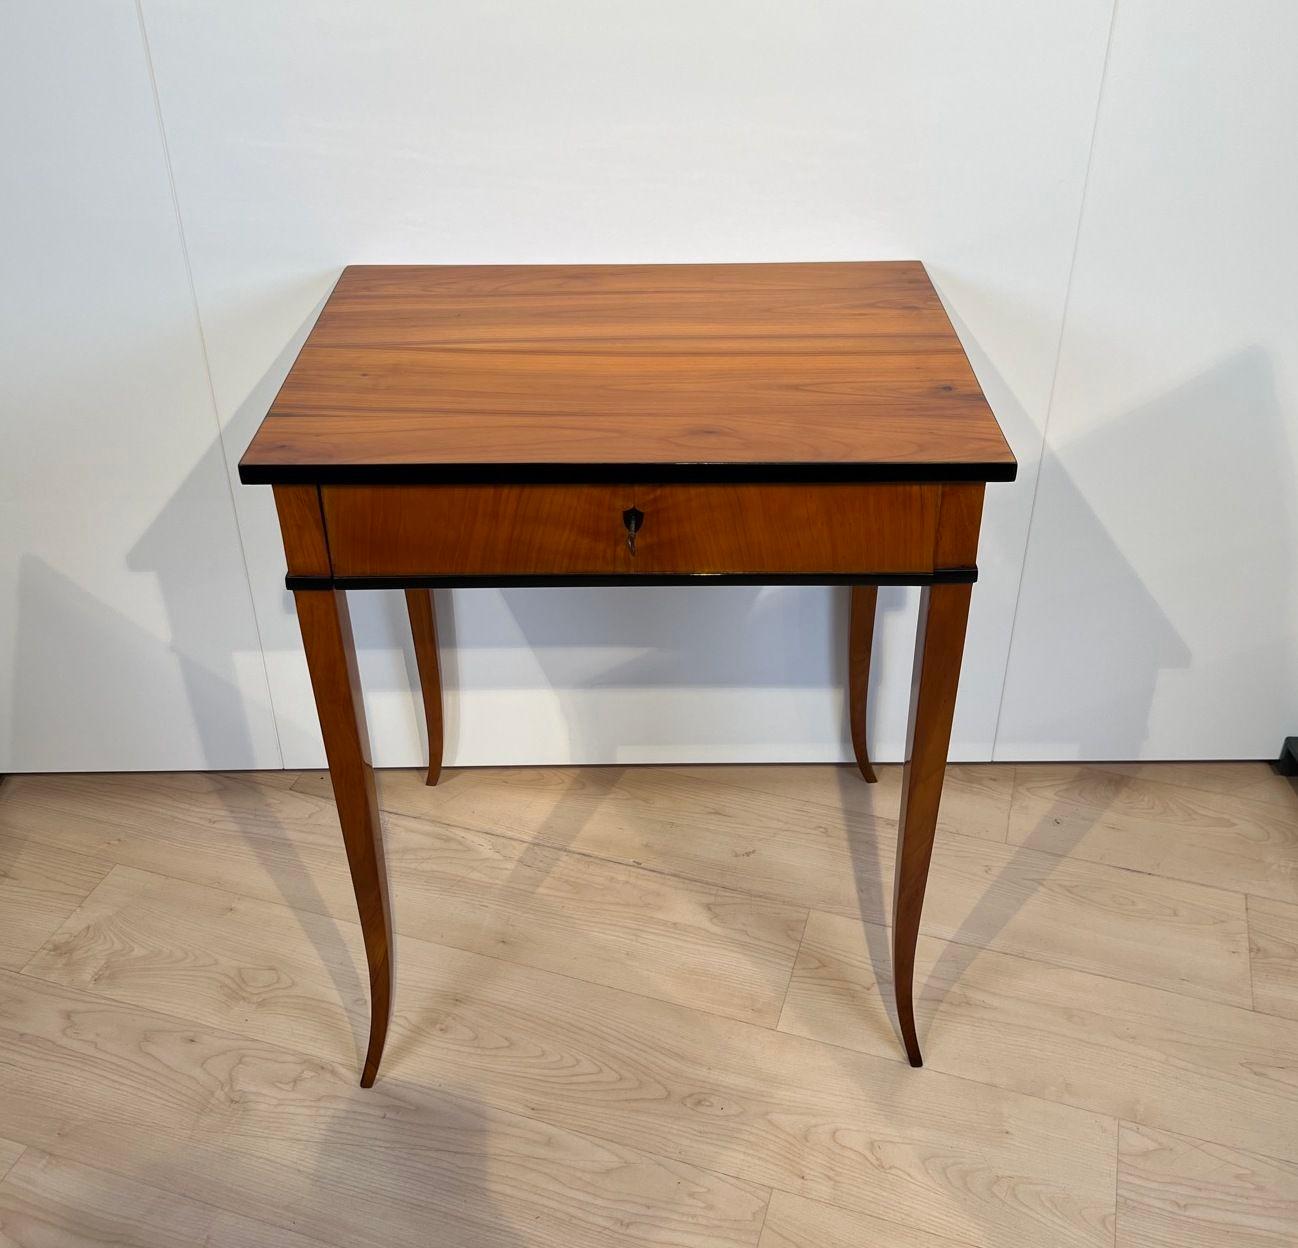 Early 19th Century Biedermeier Sewing Table, Cherry Wood, Ebonized, South Germany circa 1825 For Sale